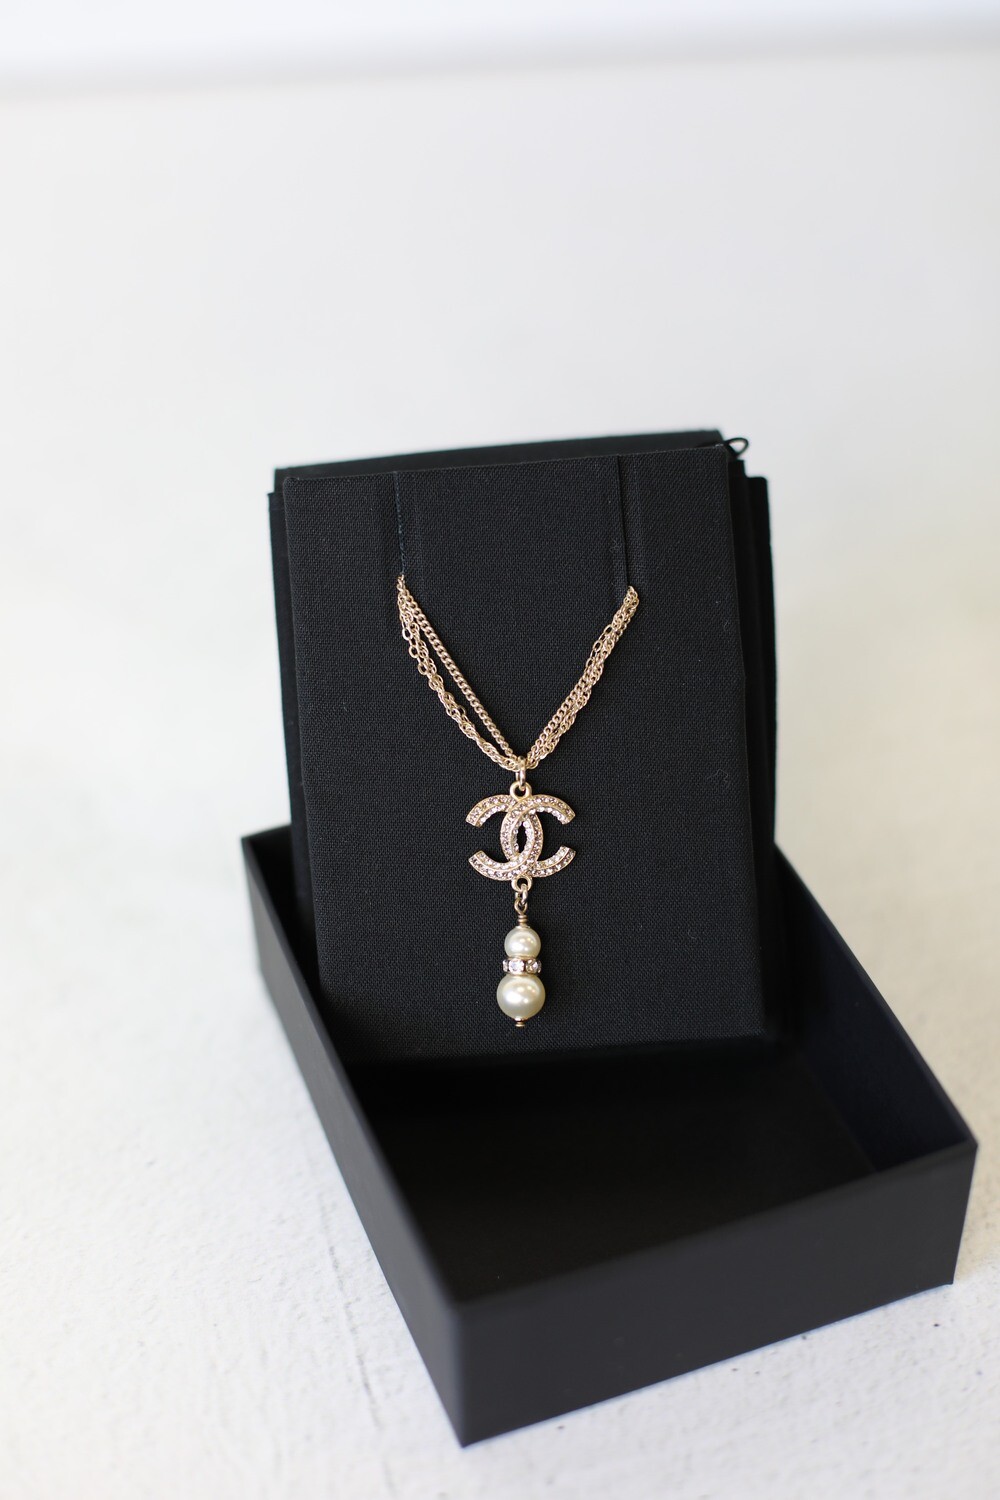 Chanel Necklace, Crystal CC with Drop Pearls, New in Box WA001